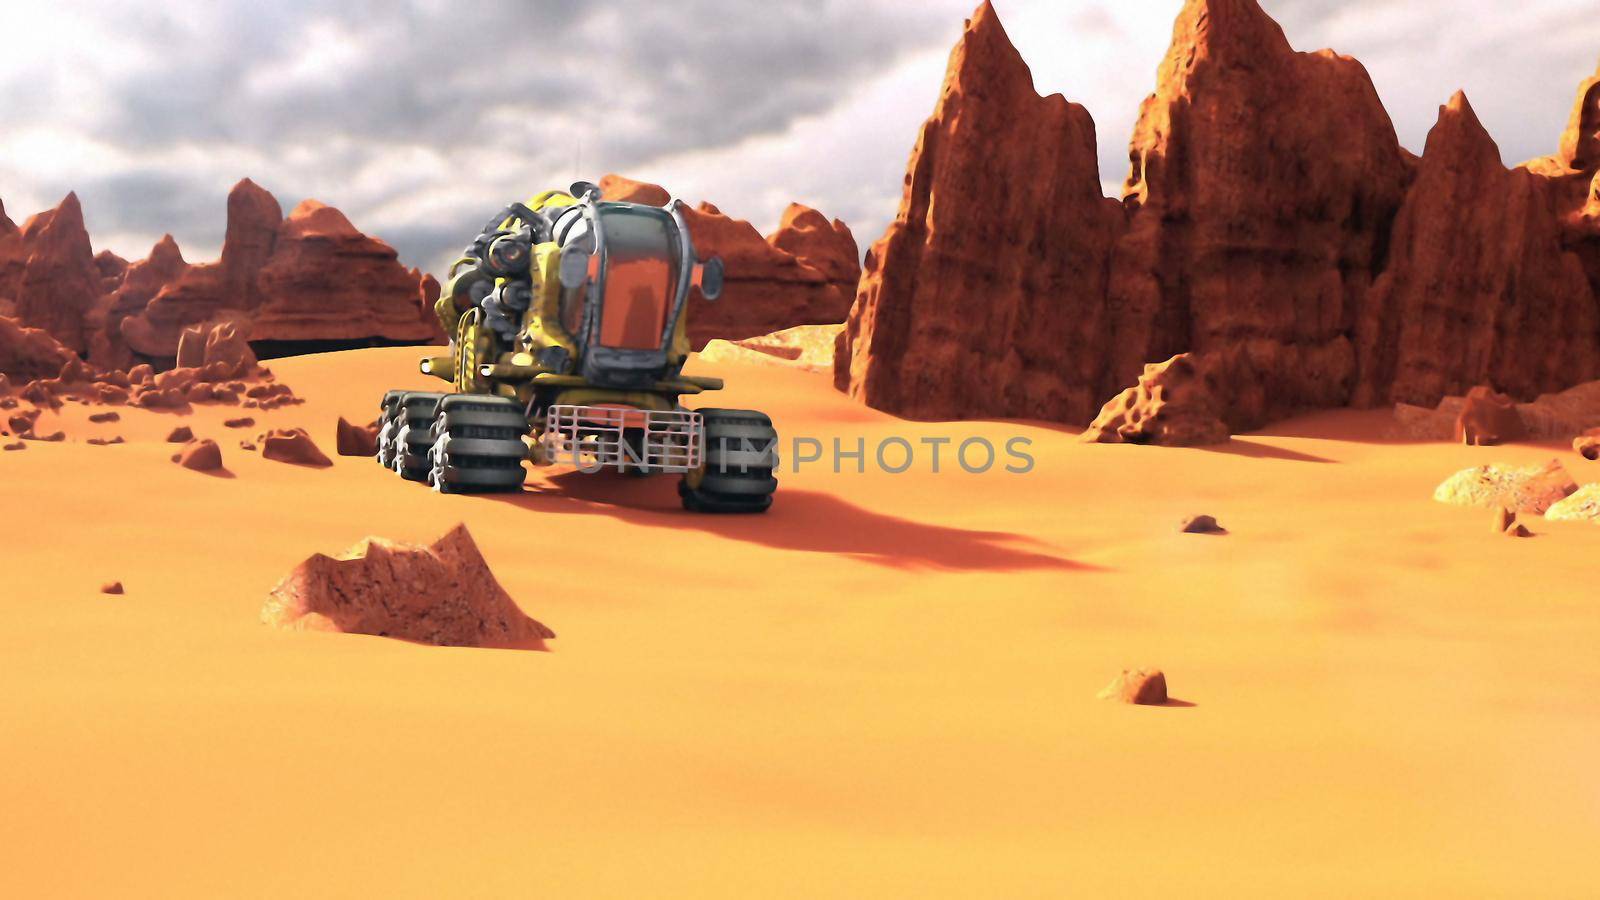 MarsRover on the red planet. A futuristic concept of a colonization of Red Planet. 3D rendering by designprojects